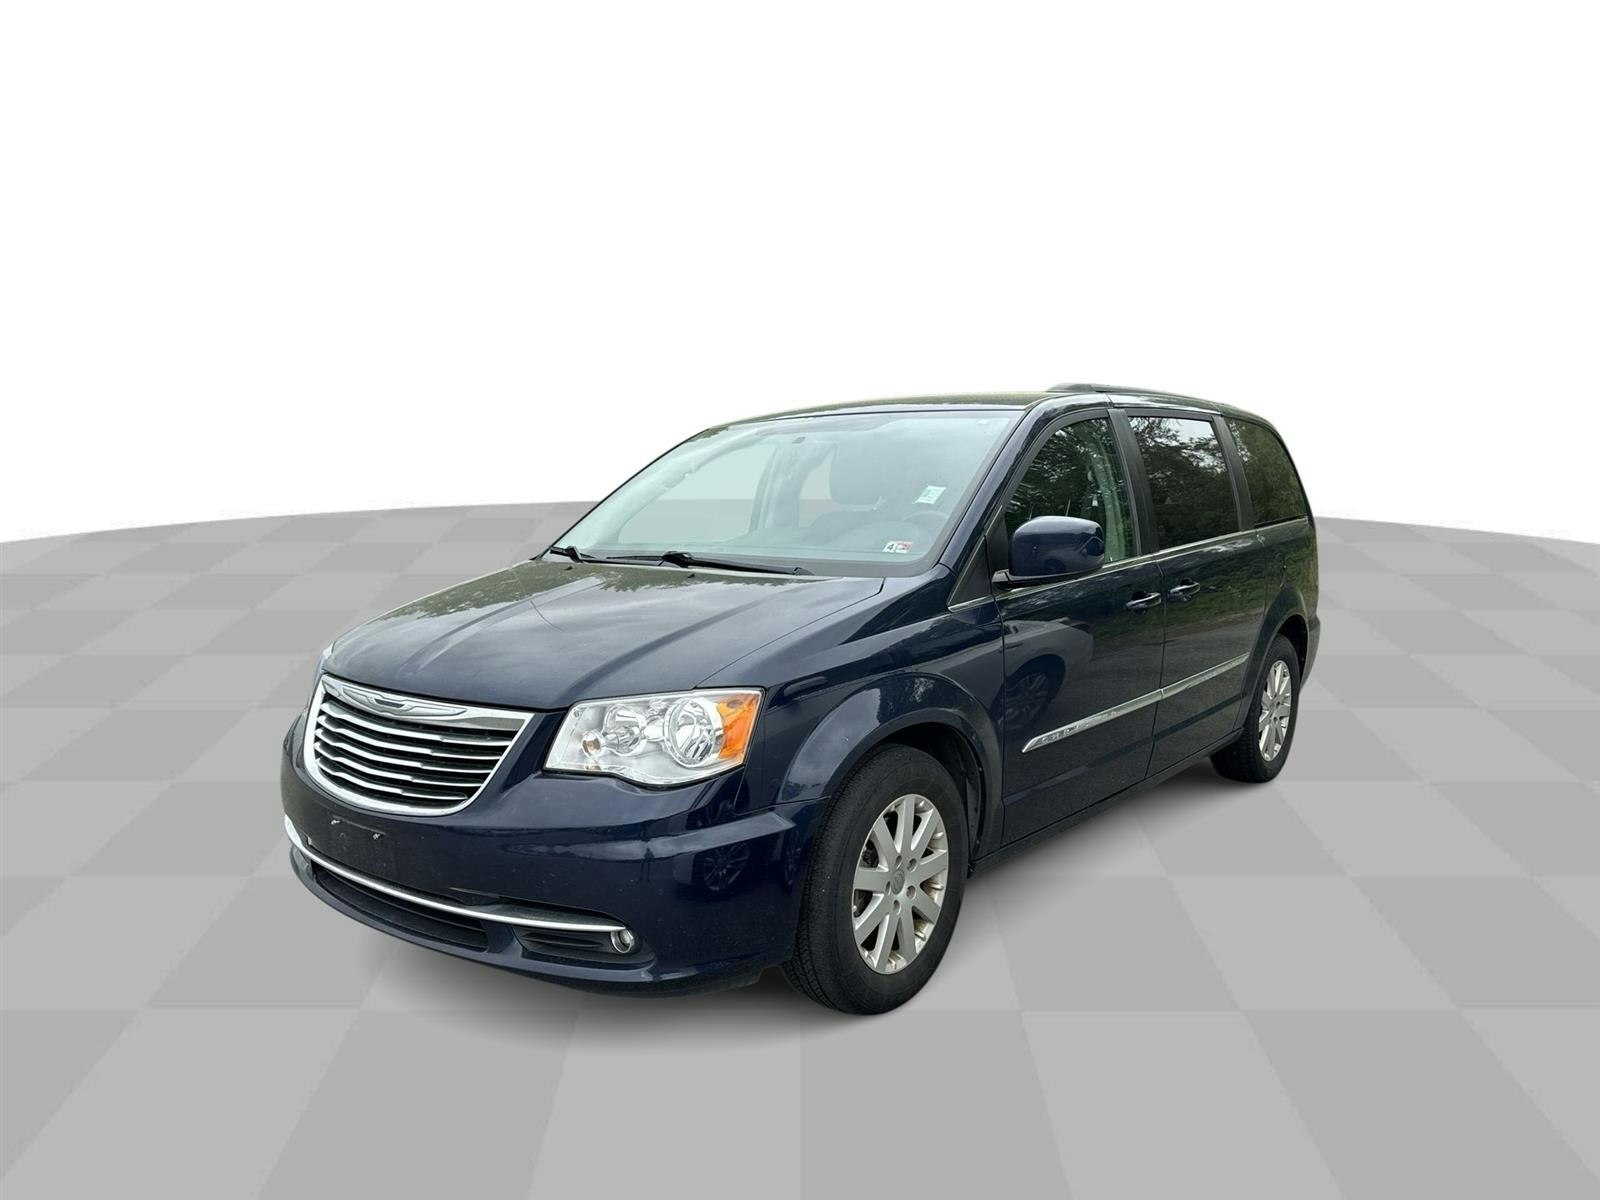 2016 Chrysler Town & Country Touring (231005A) Main Image